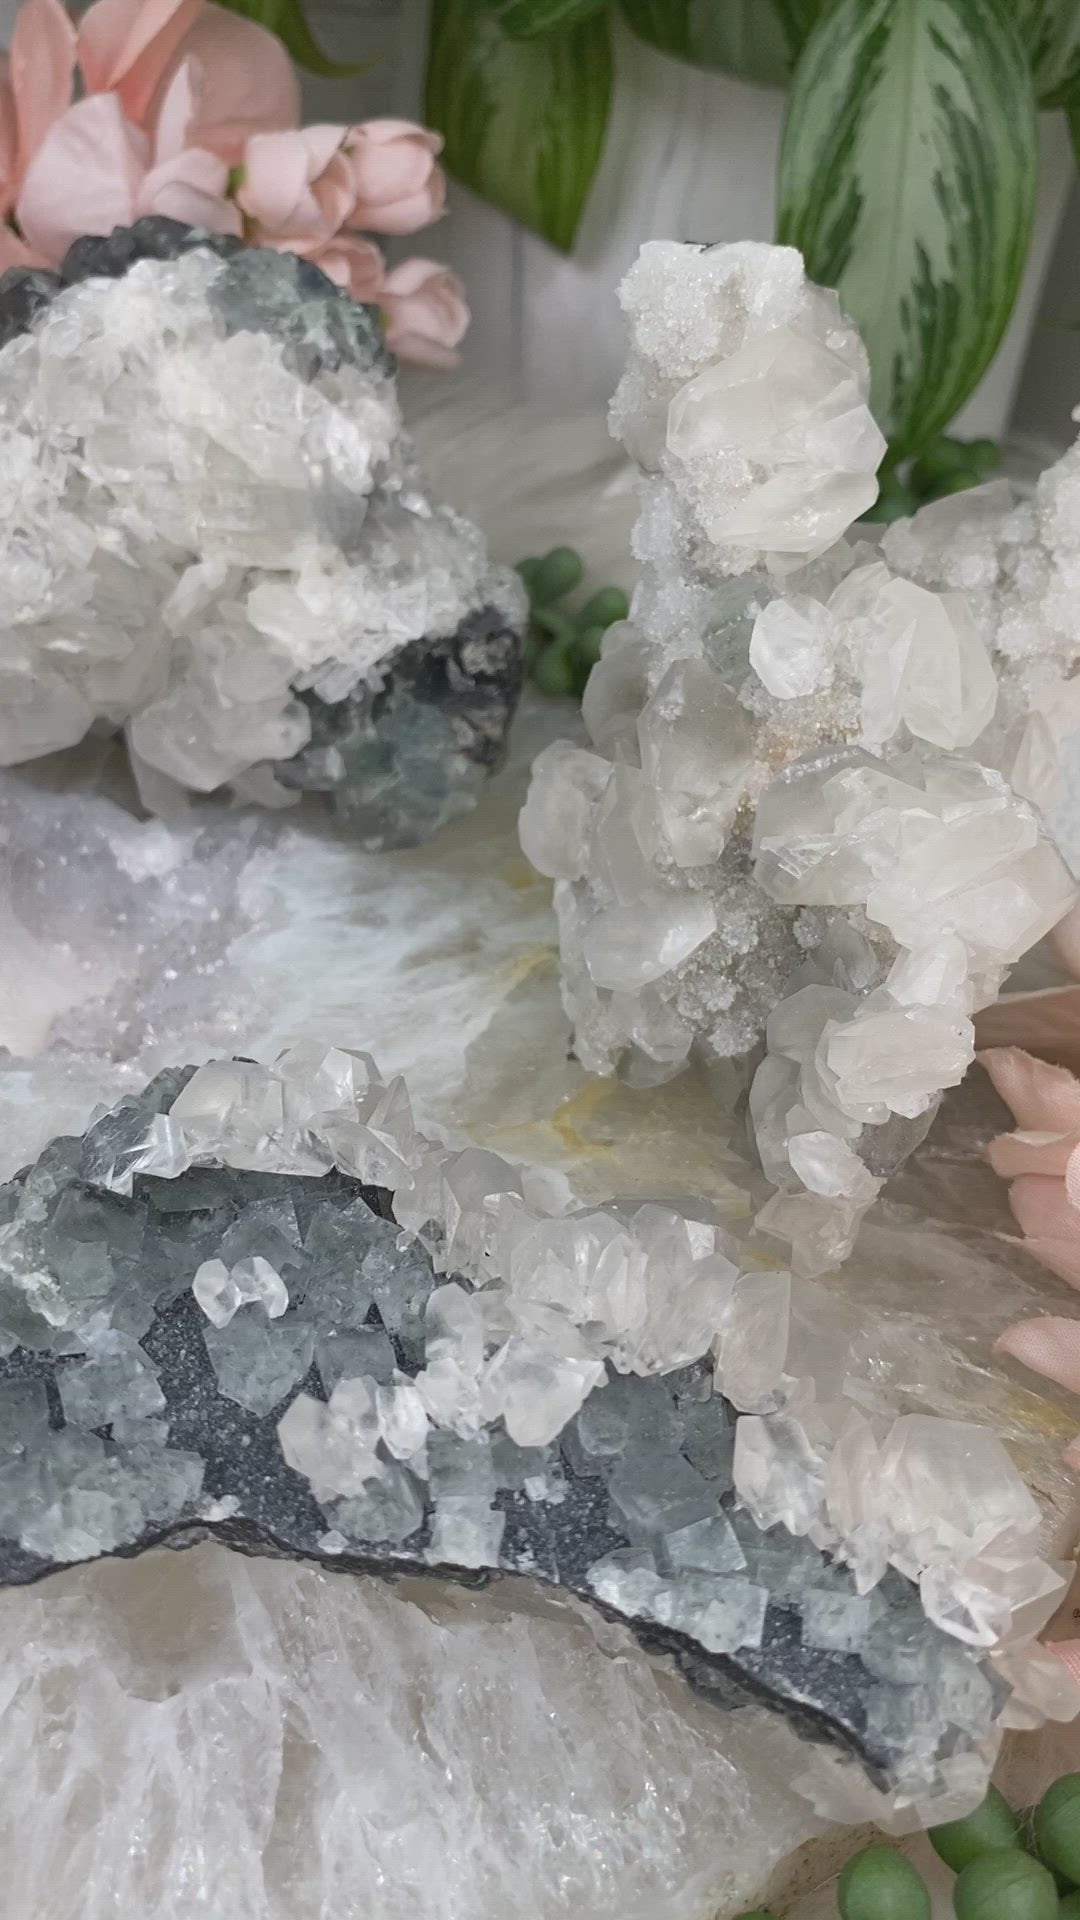 Chinese-Green-Fluorite-White-Calcite-Clusters